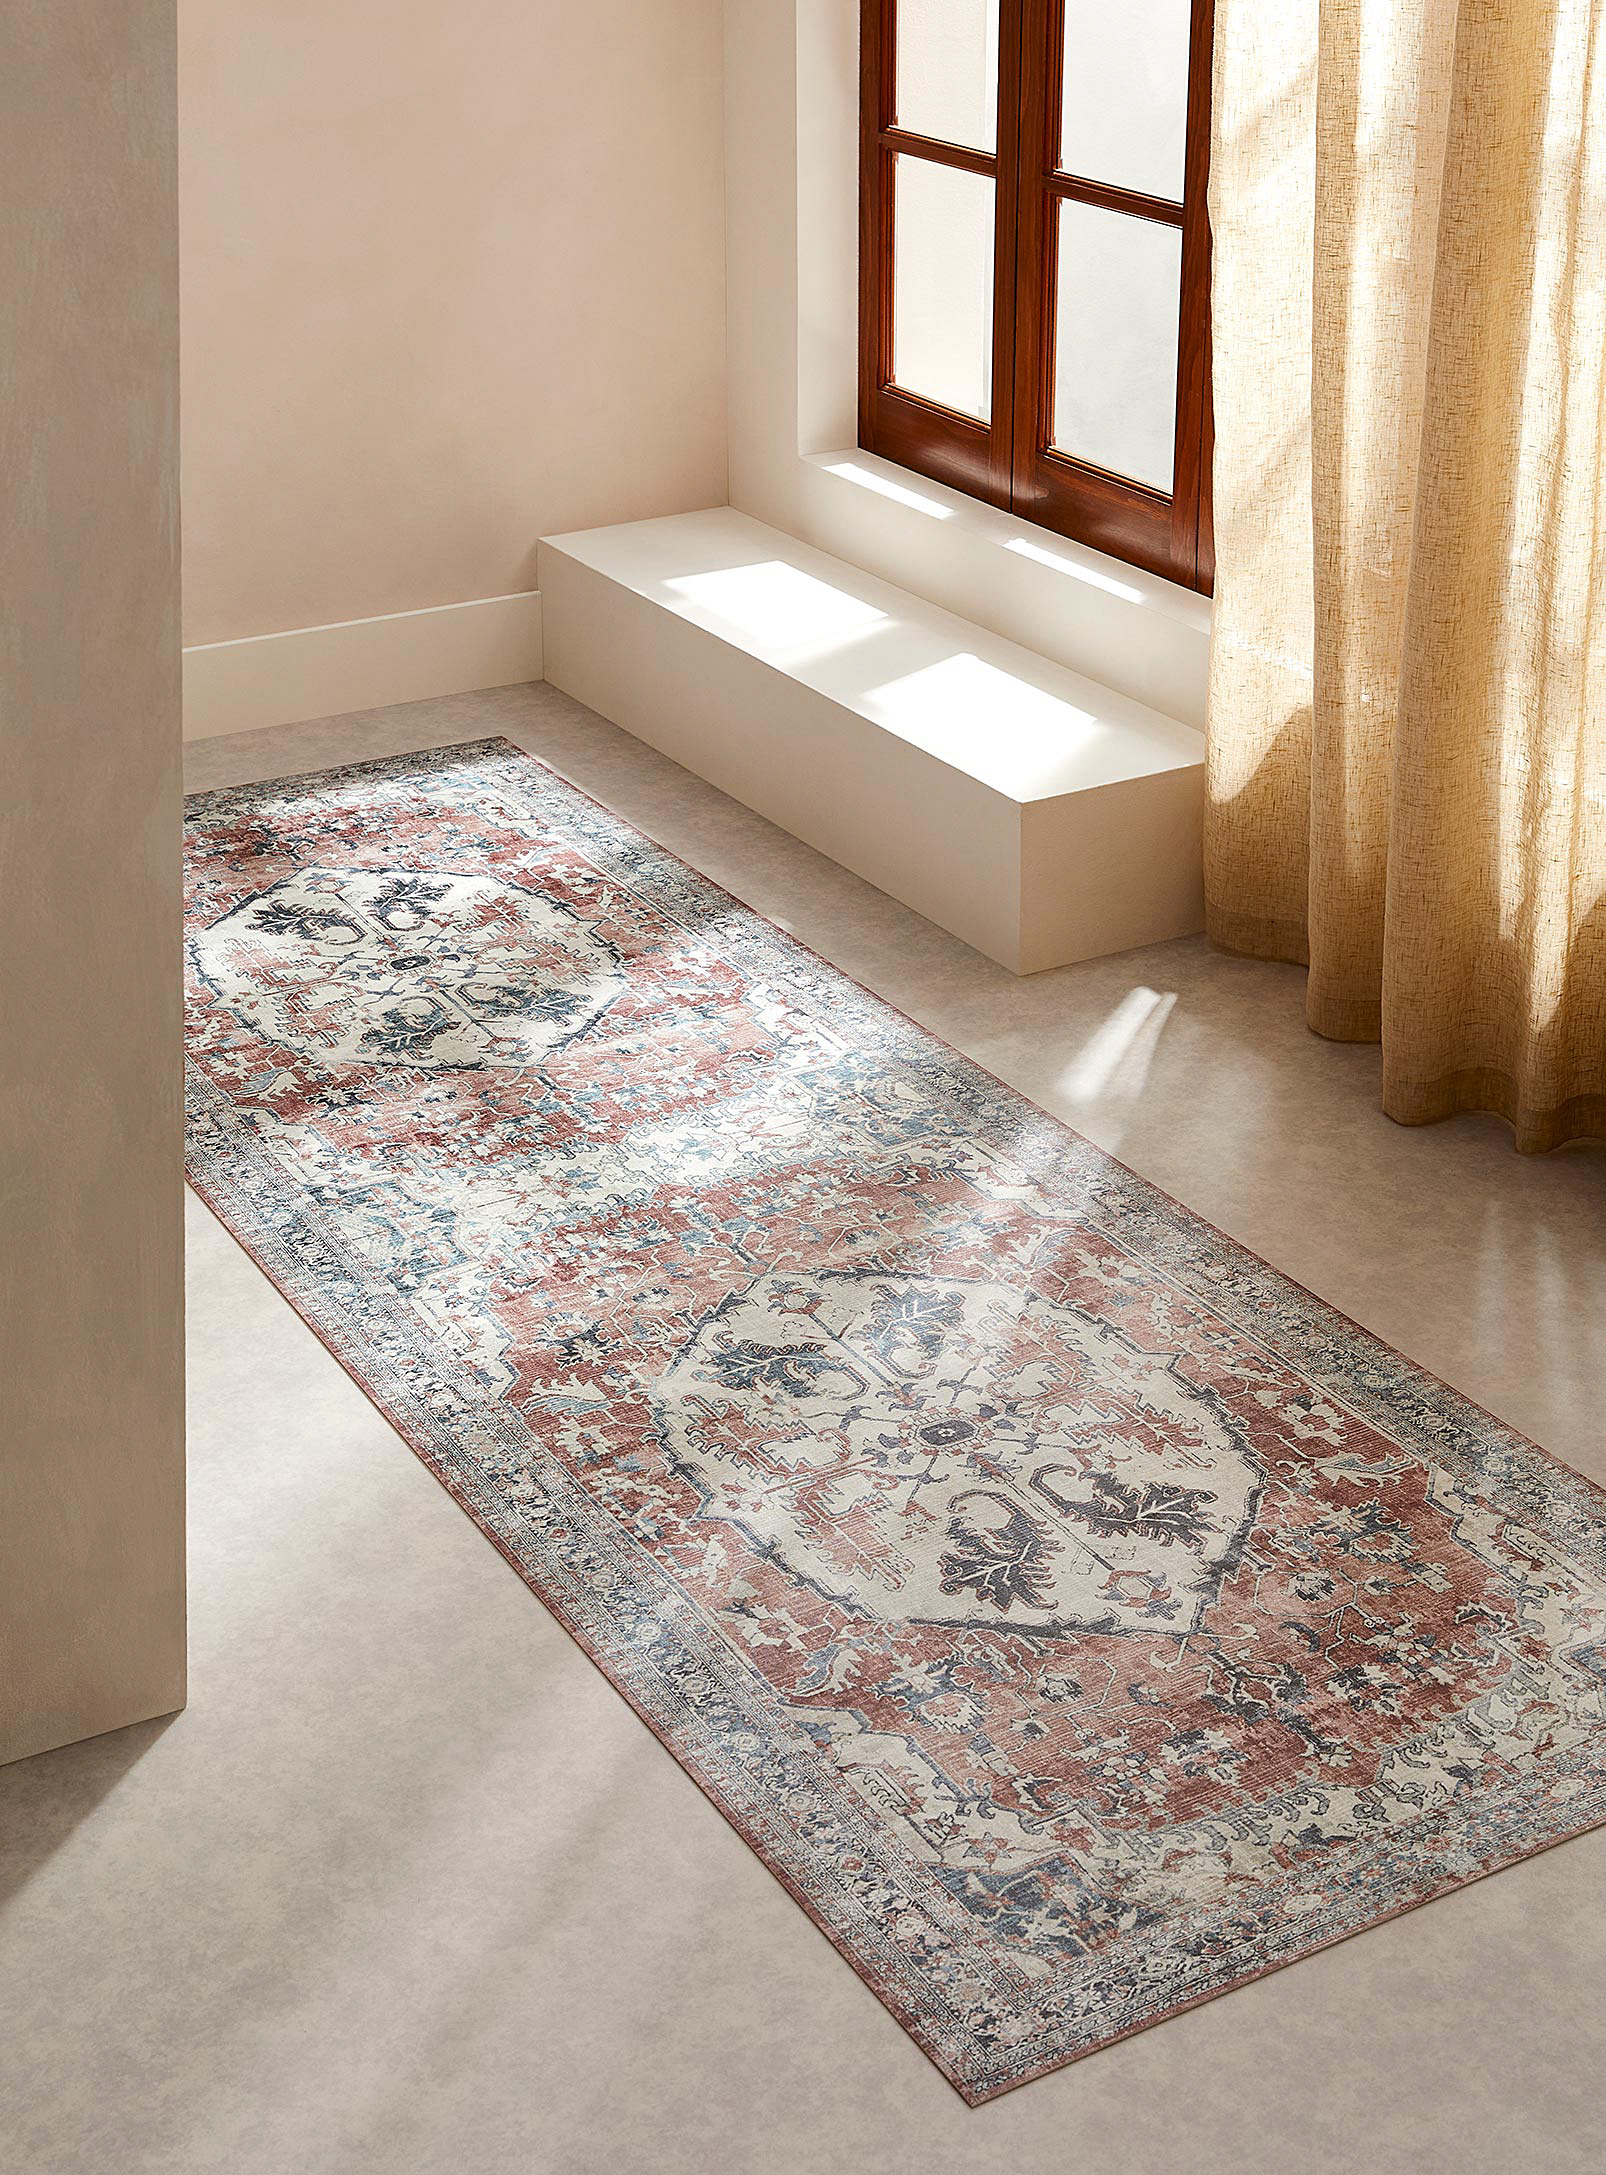 Adama Heritage Frame Vinyl Rug See Available Sizes In Patterned Red